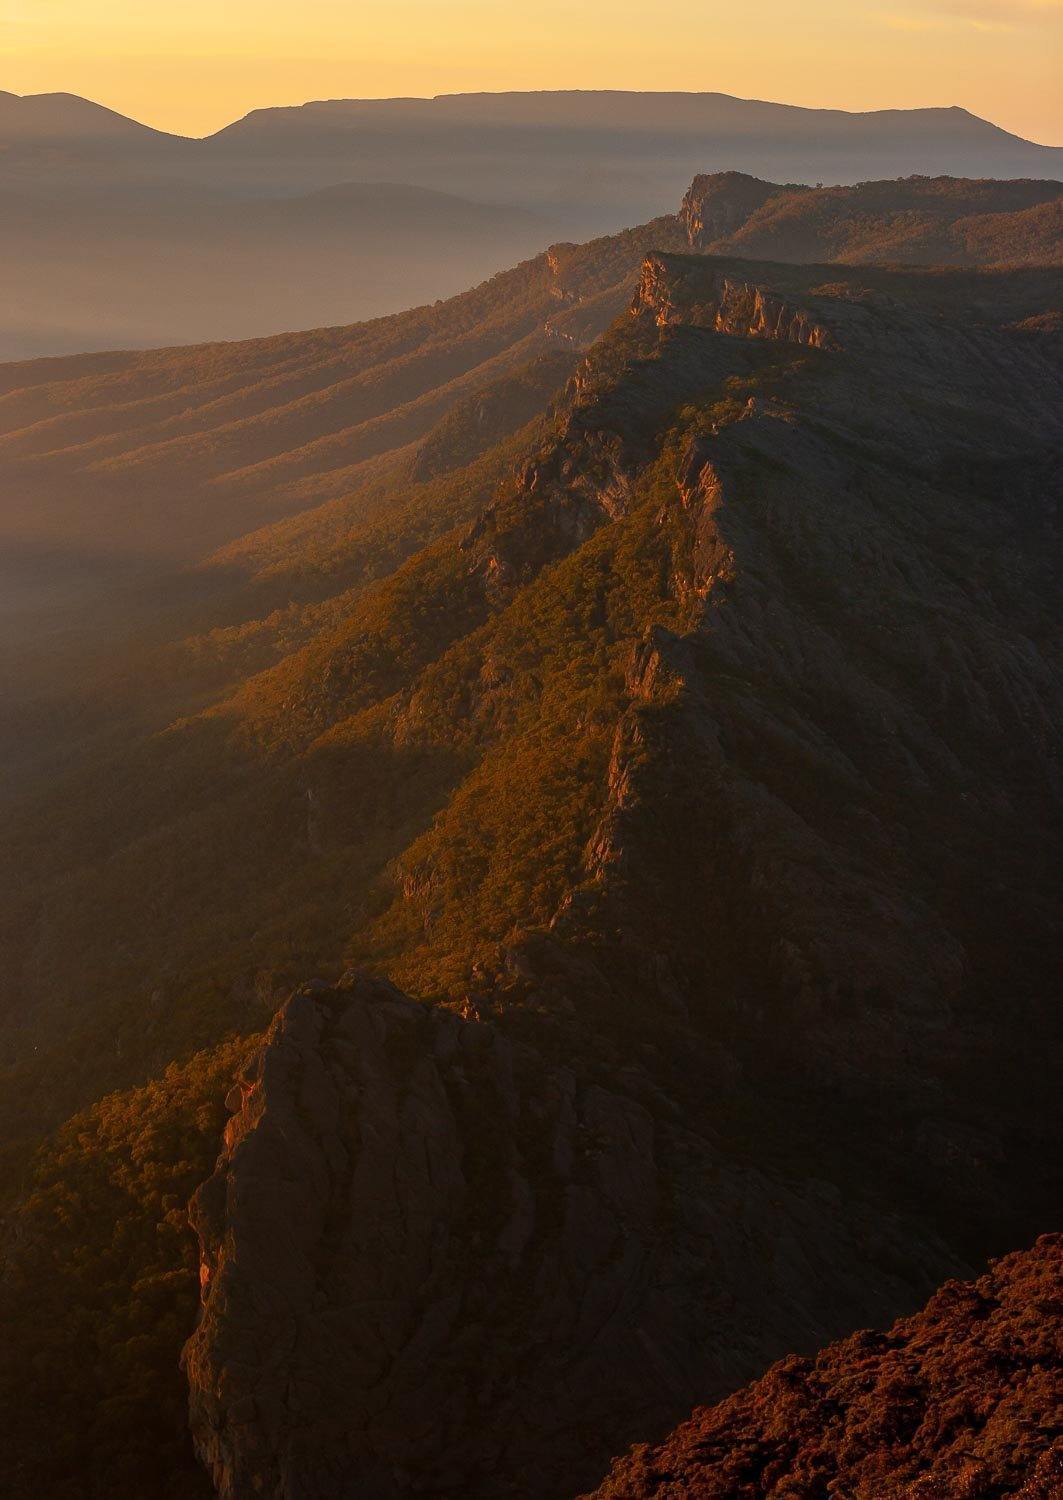 Giant greeny mountains series, Grampians Rays - The Grampians, VIC